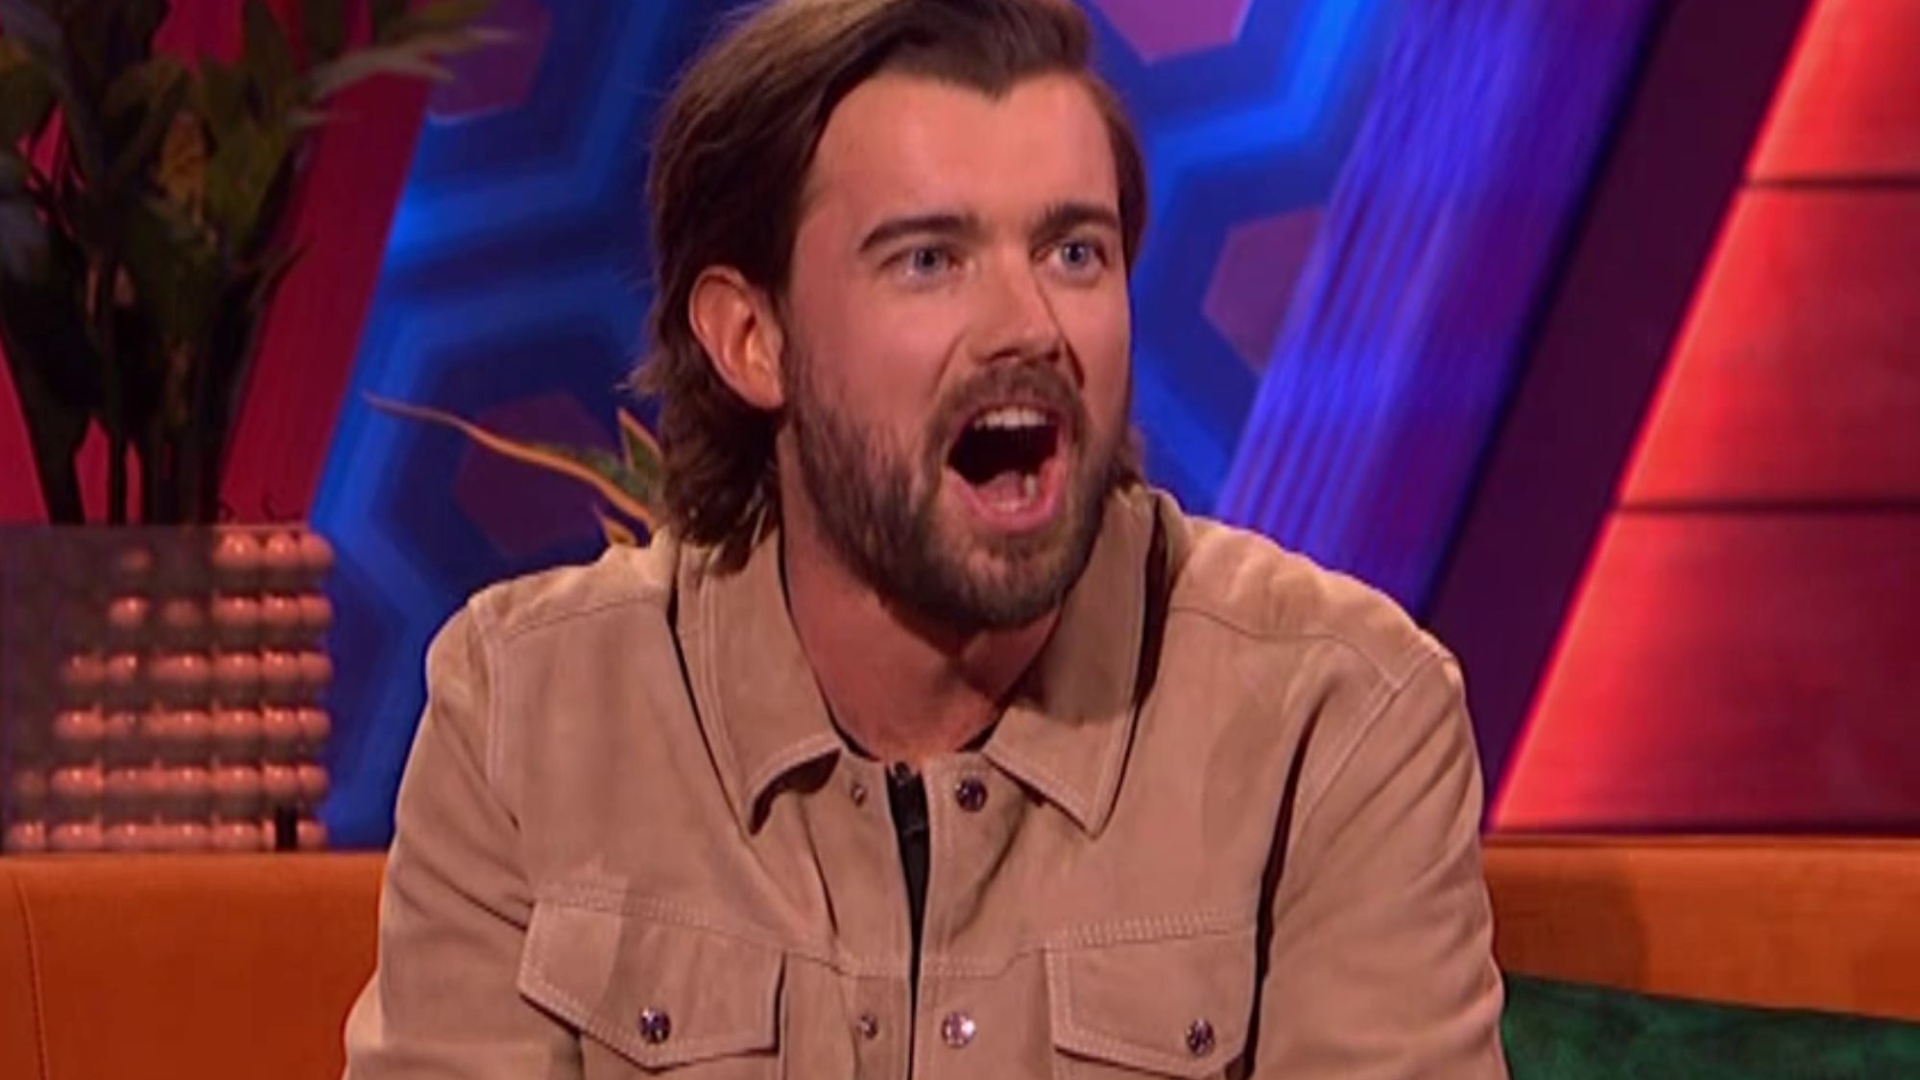 Jack Whitehall’s dig at Holly Willoughby, Phillip Schofield and Jack Whitehall has the audience in a state of shock